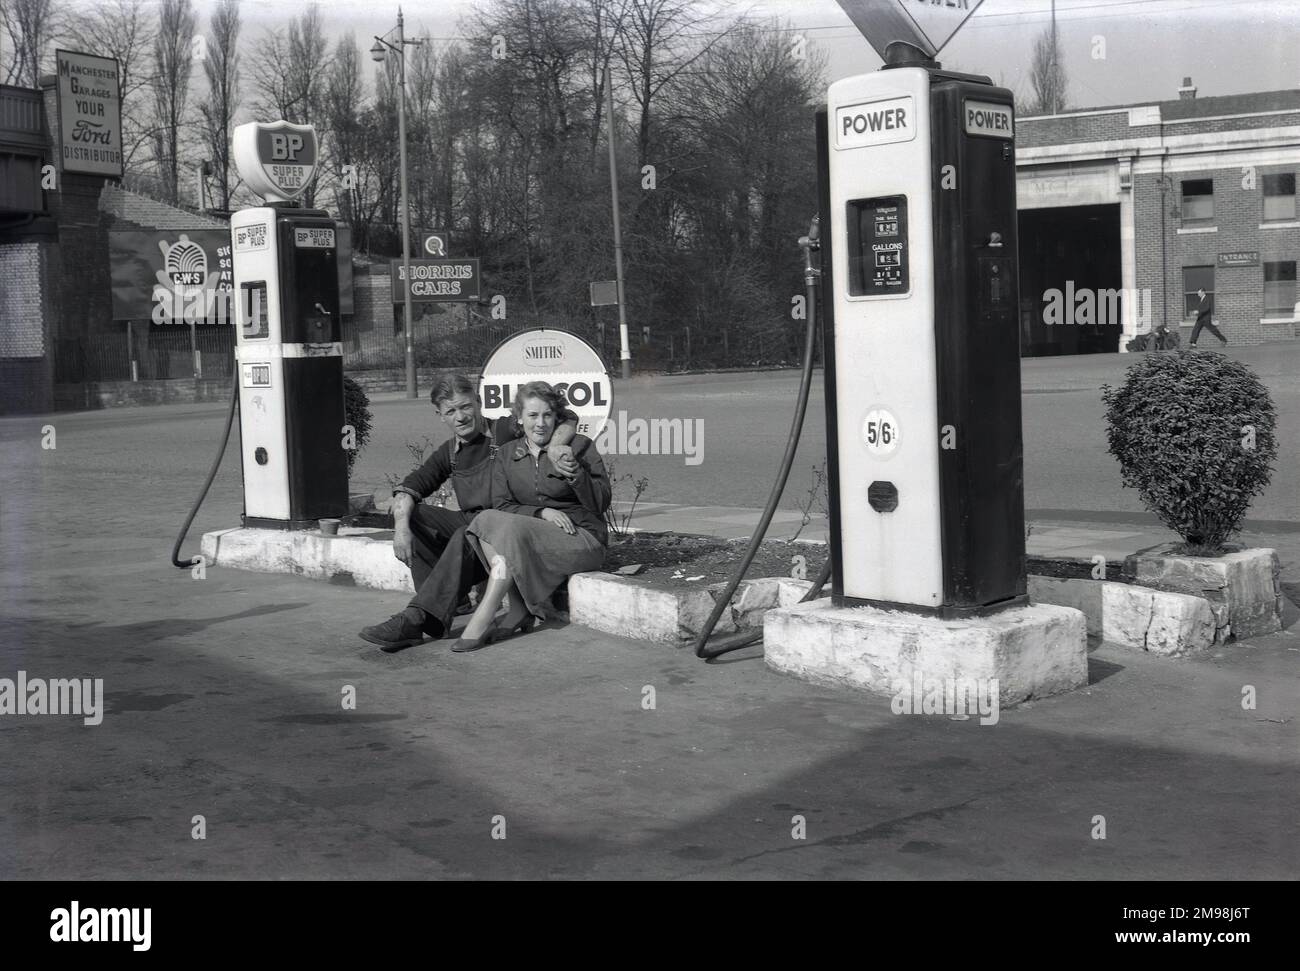 1950s, historical, a male car mechanic and female clerk of the Hargood Motor Co sitting for a photo by petrol pumps for Power and BP fuel on the forecourt of the garage, Wilmslow Rd, Parrs Wood, Didsbury, Manchester, England, UK. Price of Power petrol is 5/6d ( 5s 6d) a gallon, expensive, as it was the time of the Suez Crisis. A large bus depot servicing the city of Manchester is across the road. A sign for Morris Cars can be seen at the entrance to the railway bridge, with the East Didsbury & Parrs Wood railway station nearby. Stock Photo